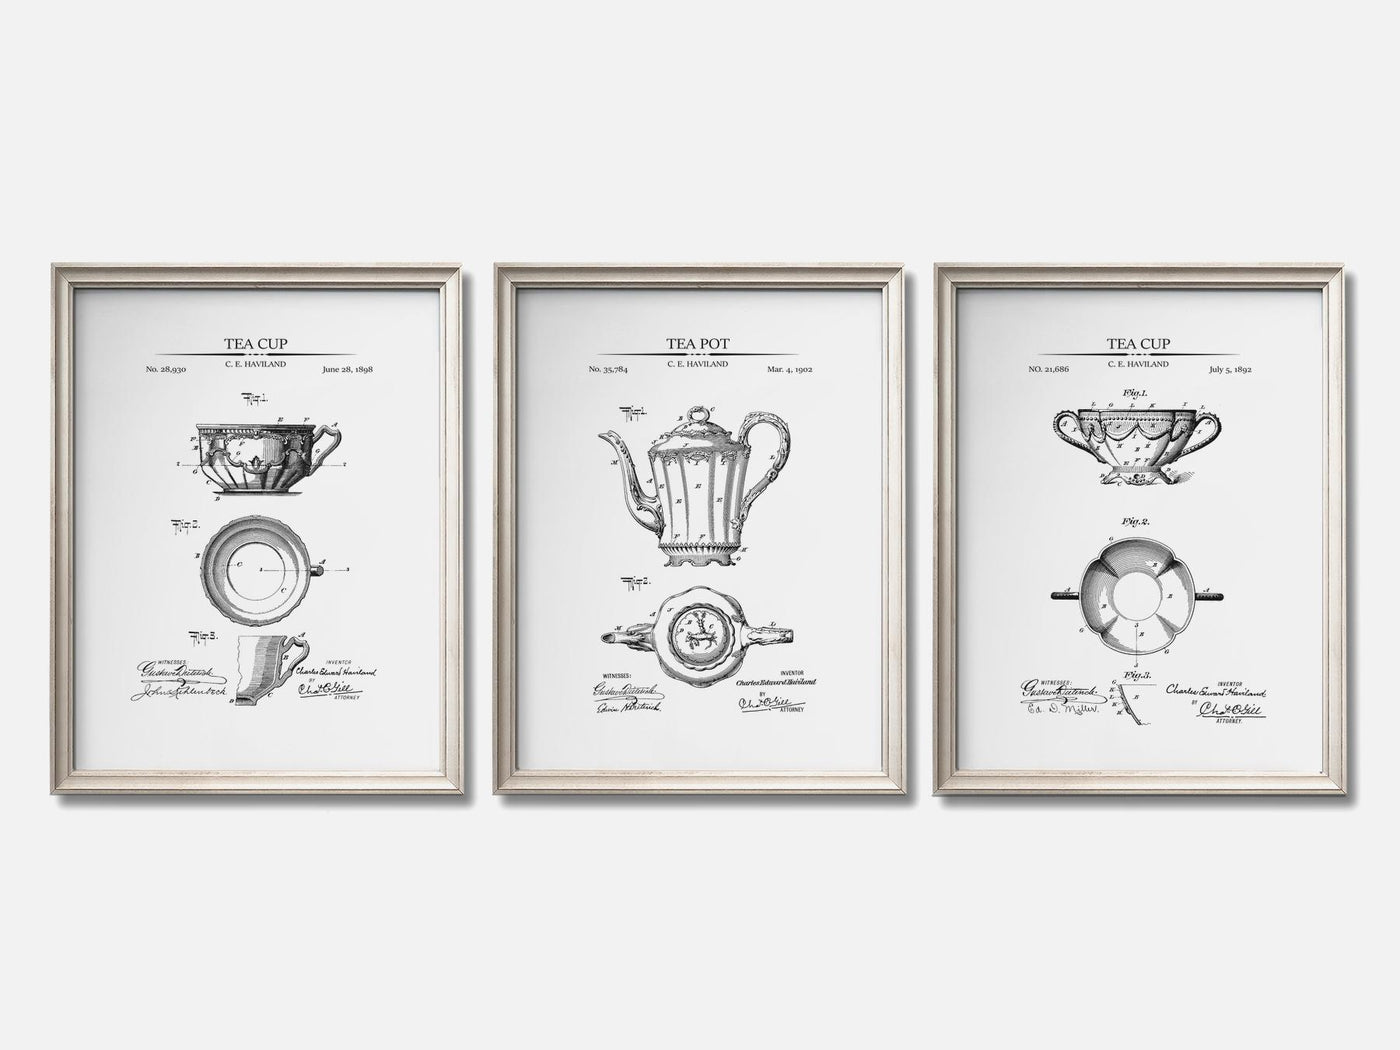 Victorian Tea Party - Patent Print Set of 3 mockup - A_t10069-V1-PC_F+O-SS_3-PS_11x14-C_whi variant